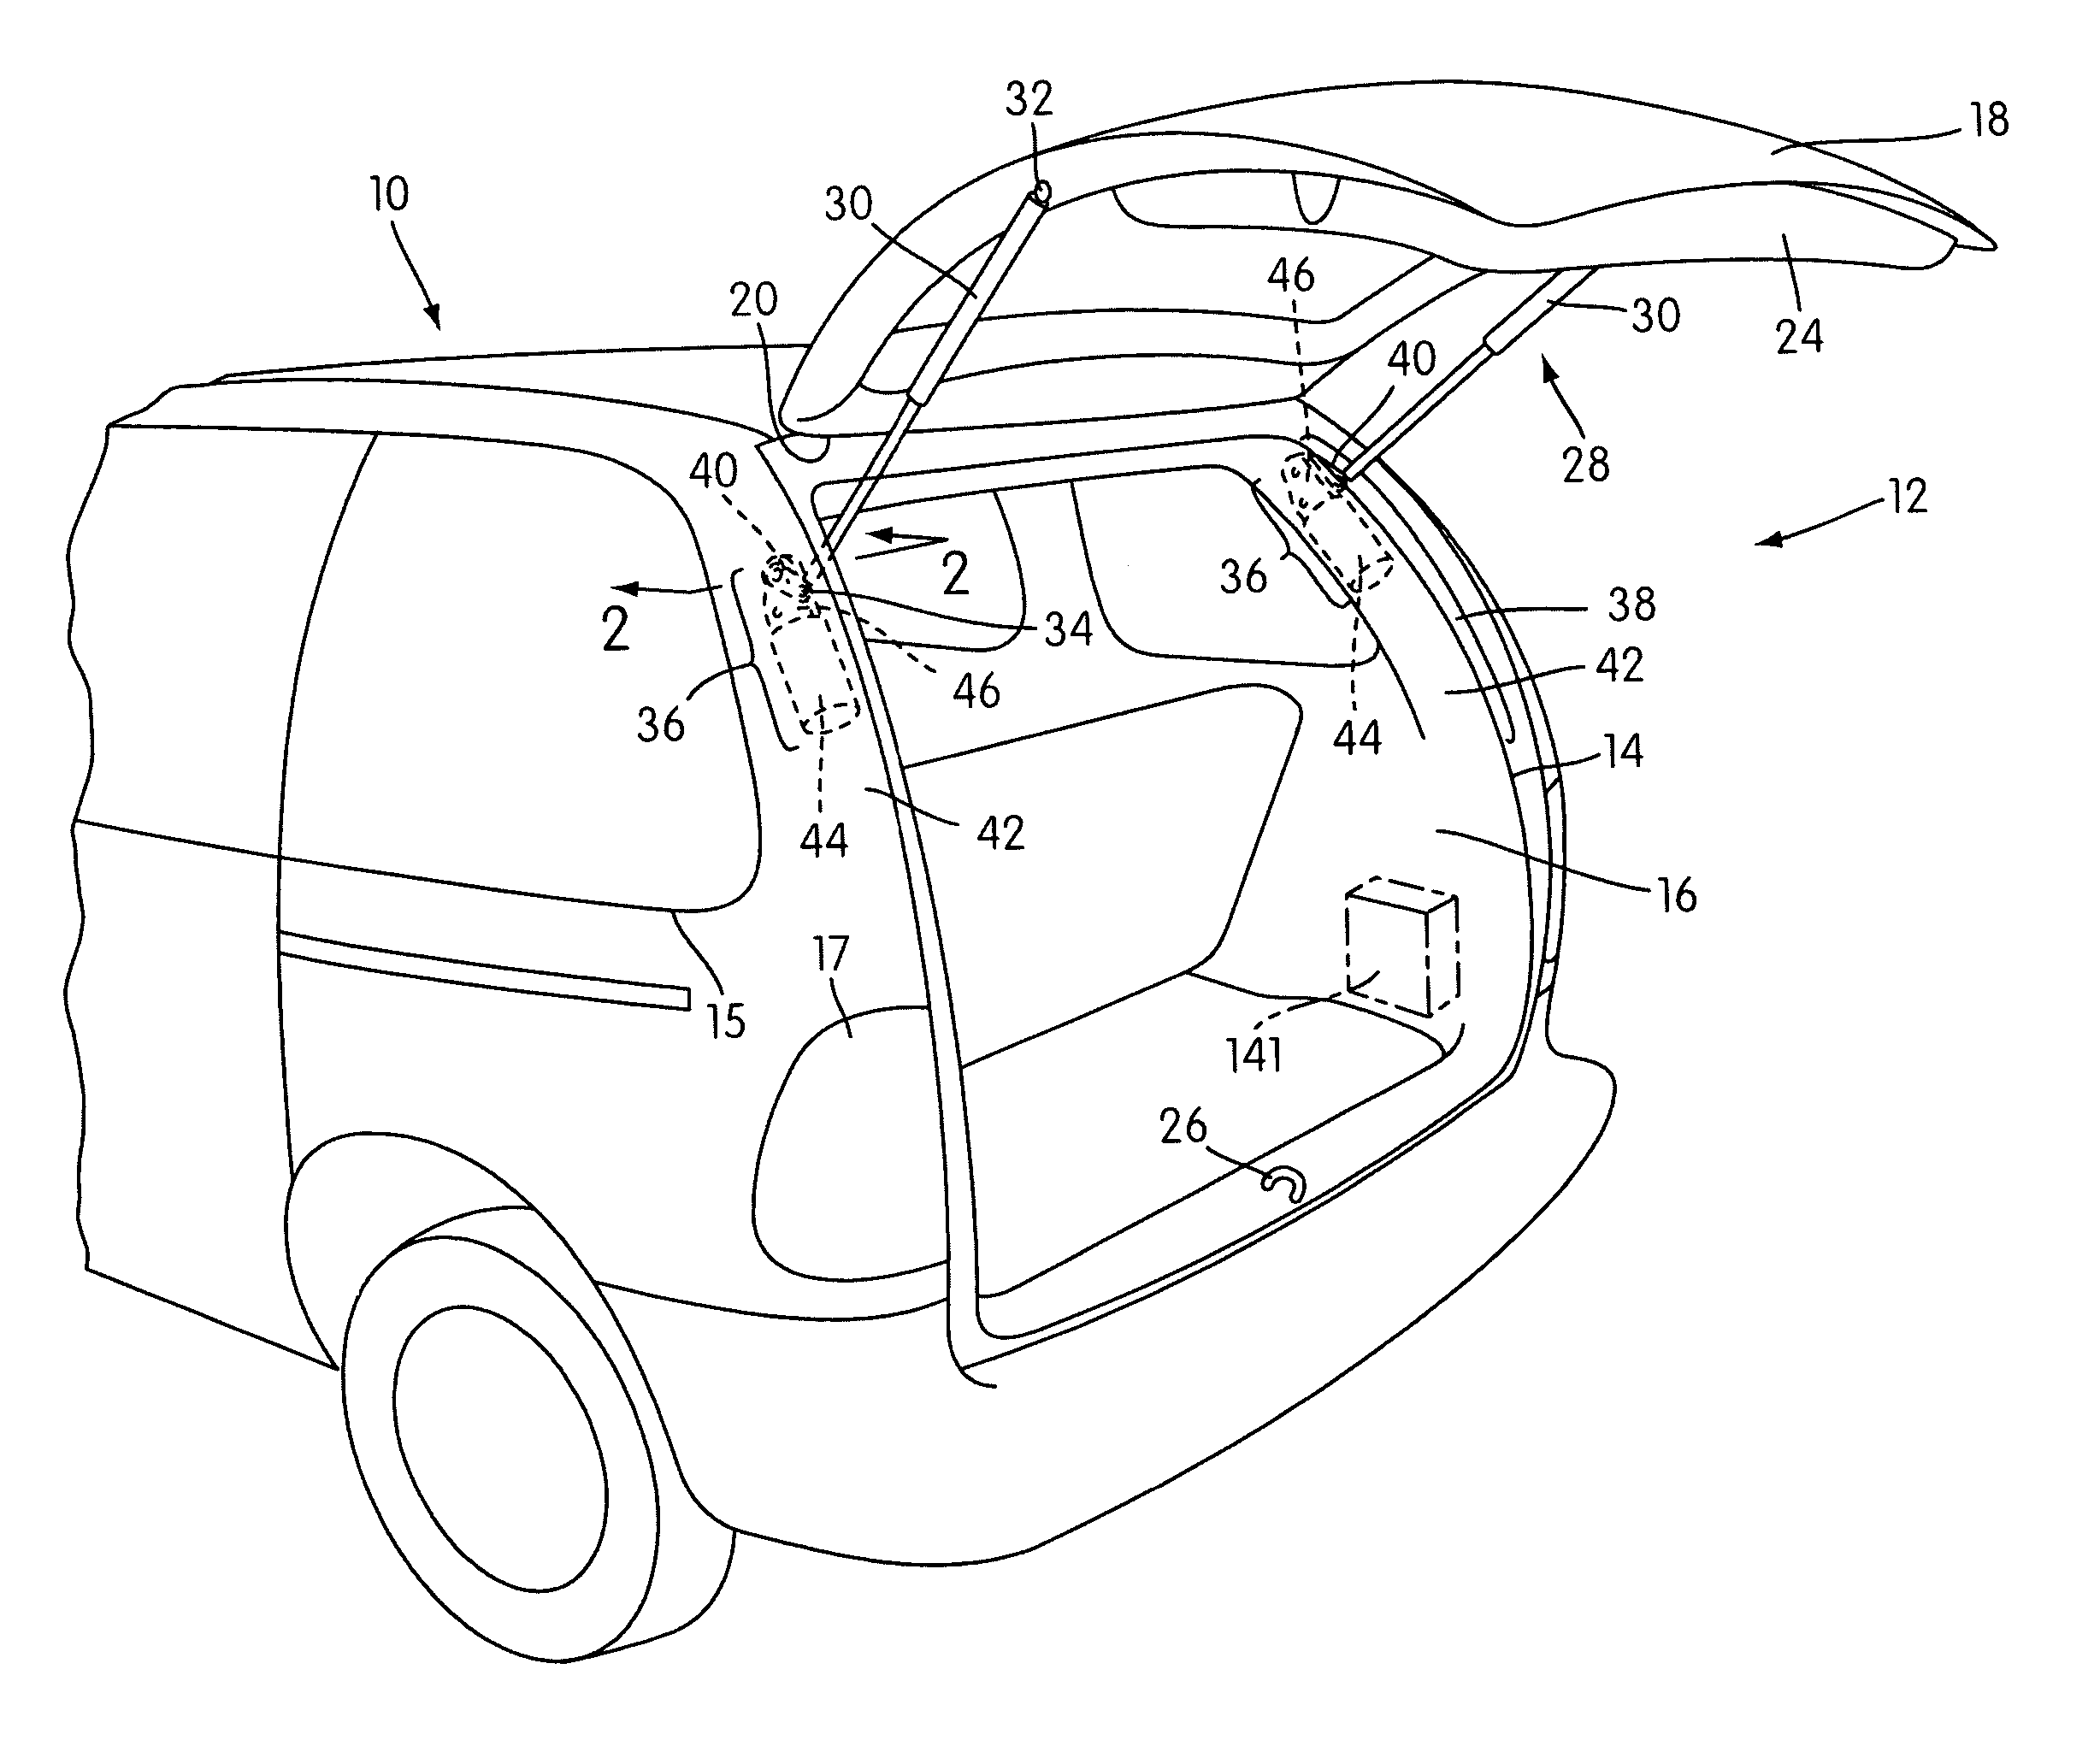 Powered opening mechanism and control system